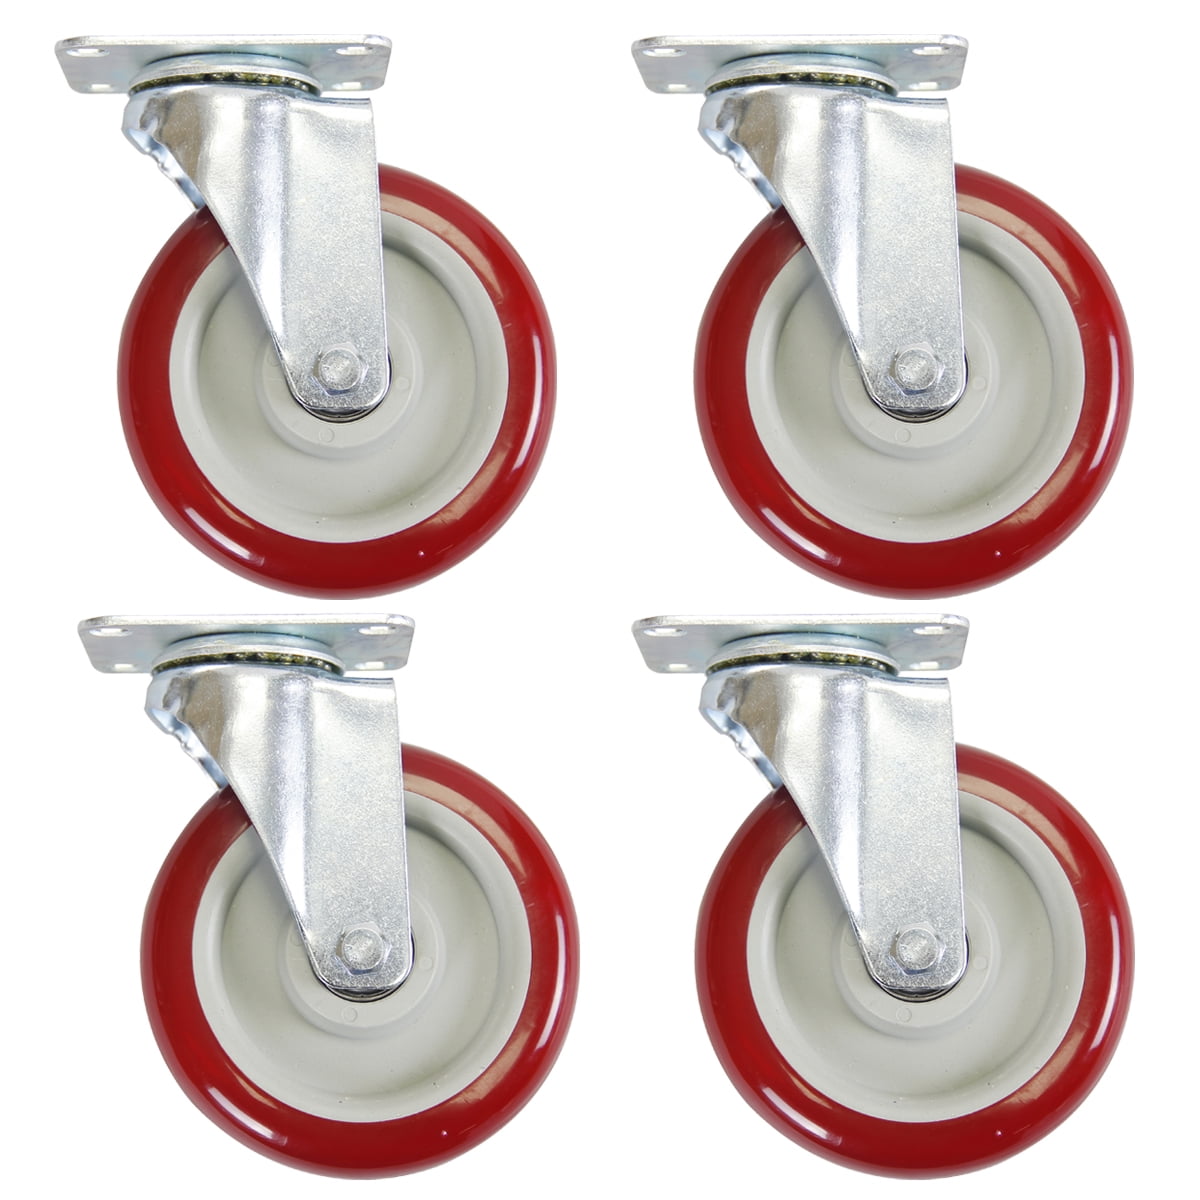 Rubber Set of 4 3 Inch Houseables Caster Wheels Heavy Duty, Casters 